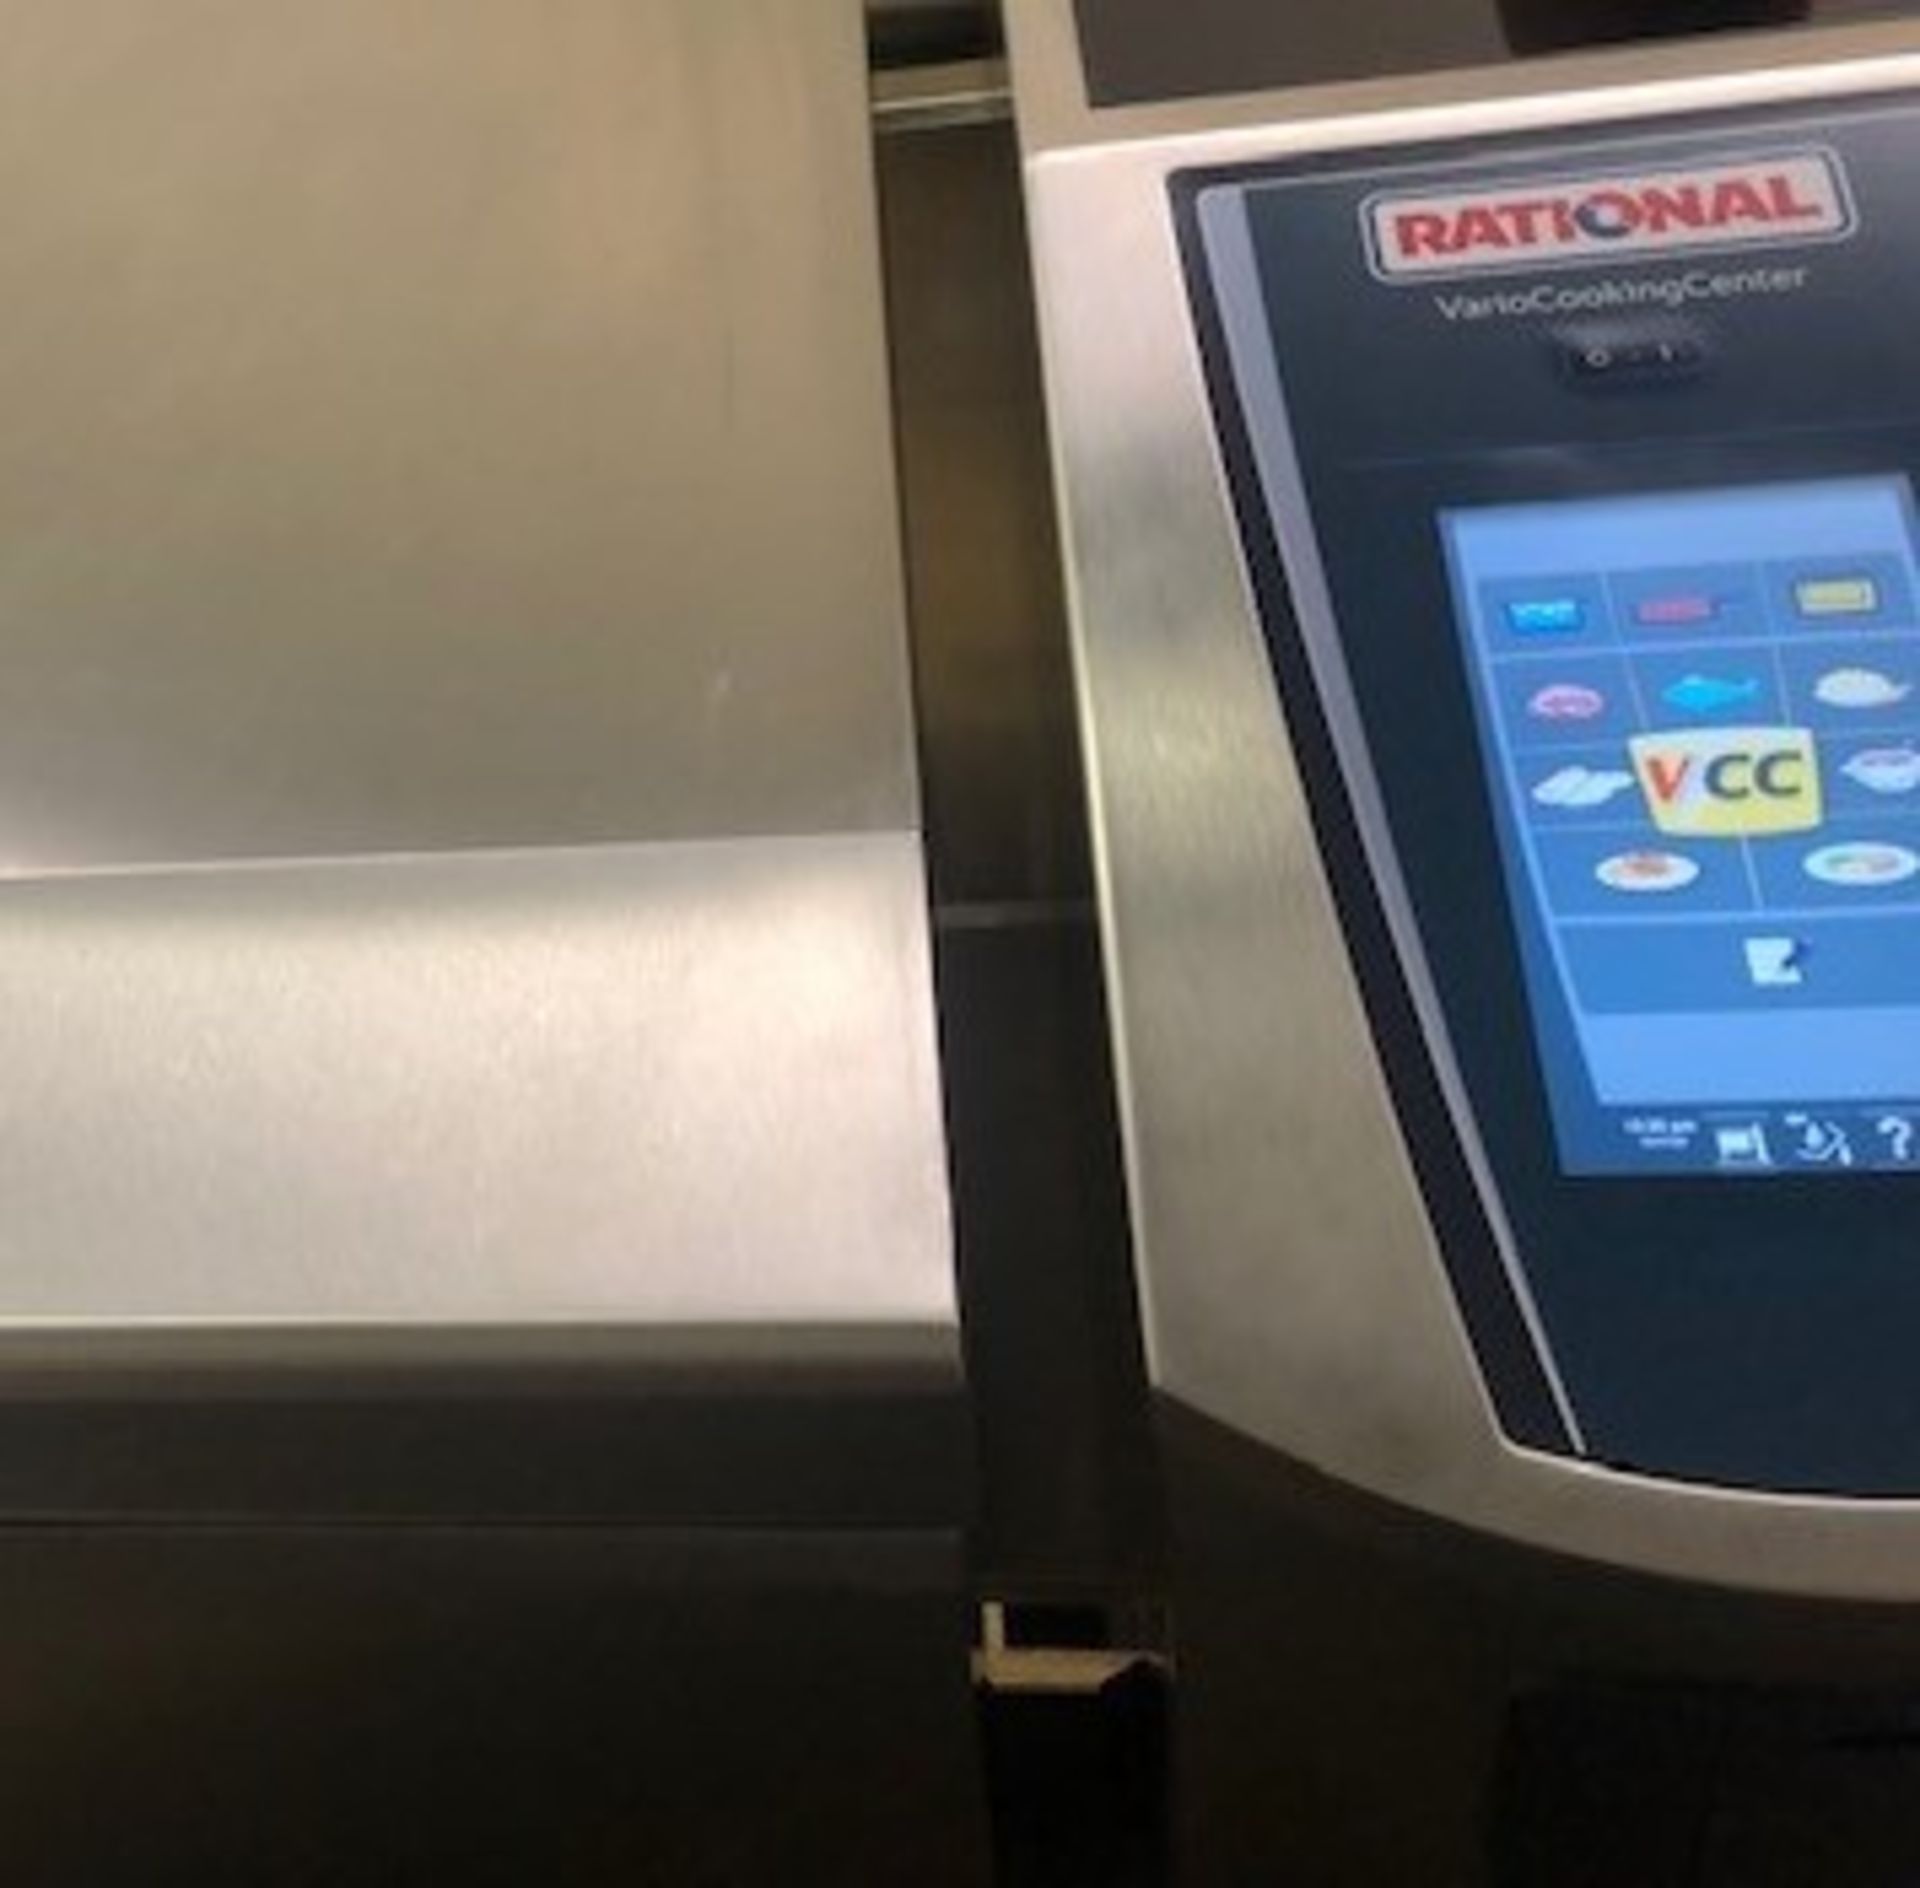 Rational VarioCooking Centre VCC311. 2019 model. Ex Demo. Tested and working. - Image 11 of 11